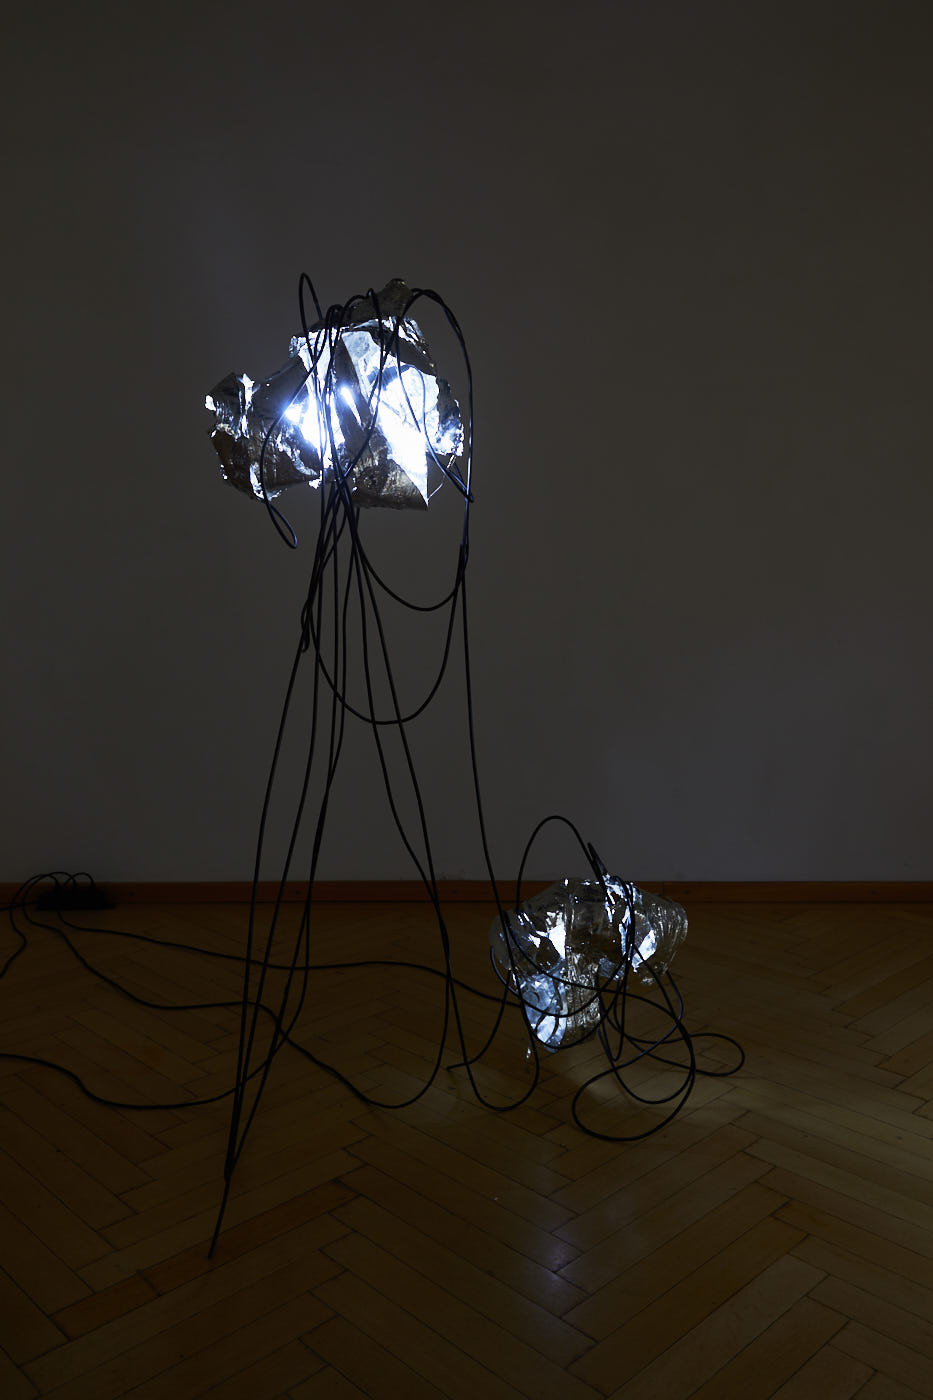 Eugen Wist, Dying Ember I and II 2019, tin, steel, cable, LEDs, 155 x 70 x 60 cm and 45 x 40 x 50 cm